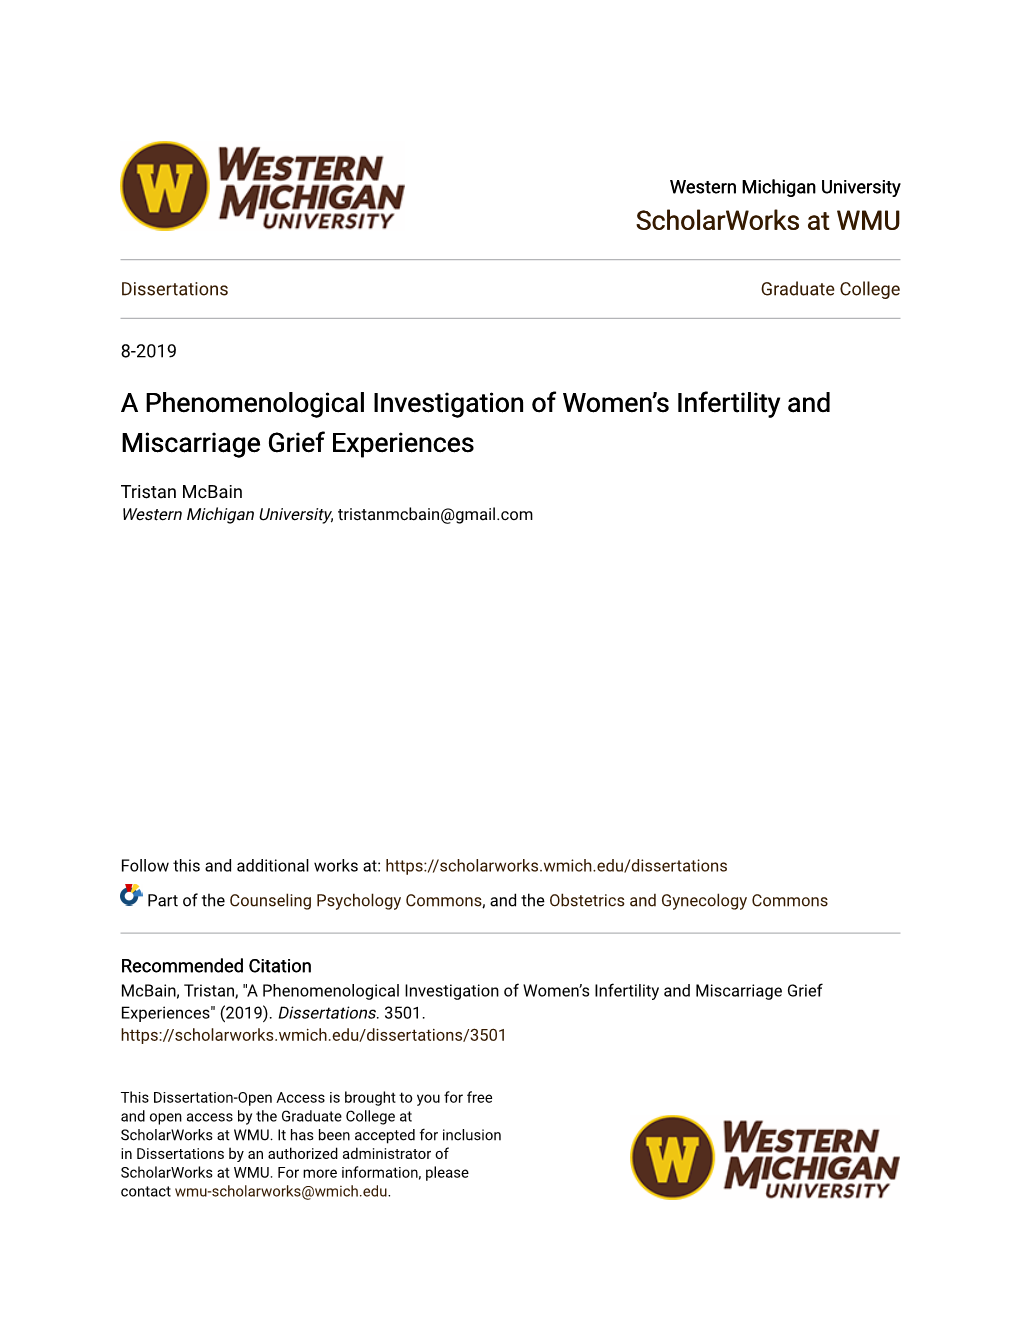 A Phenomenological Investigation of Women's Infertility and Miscarriage